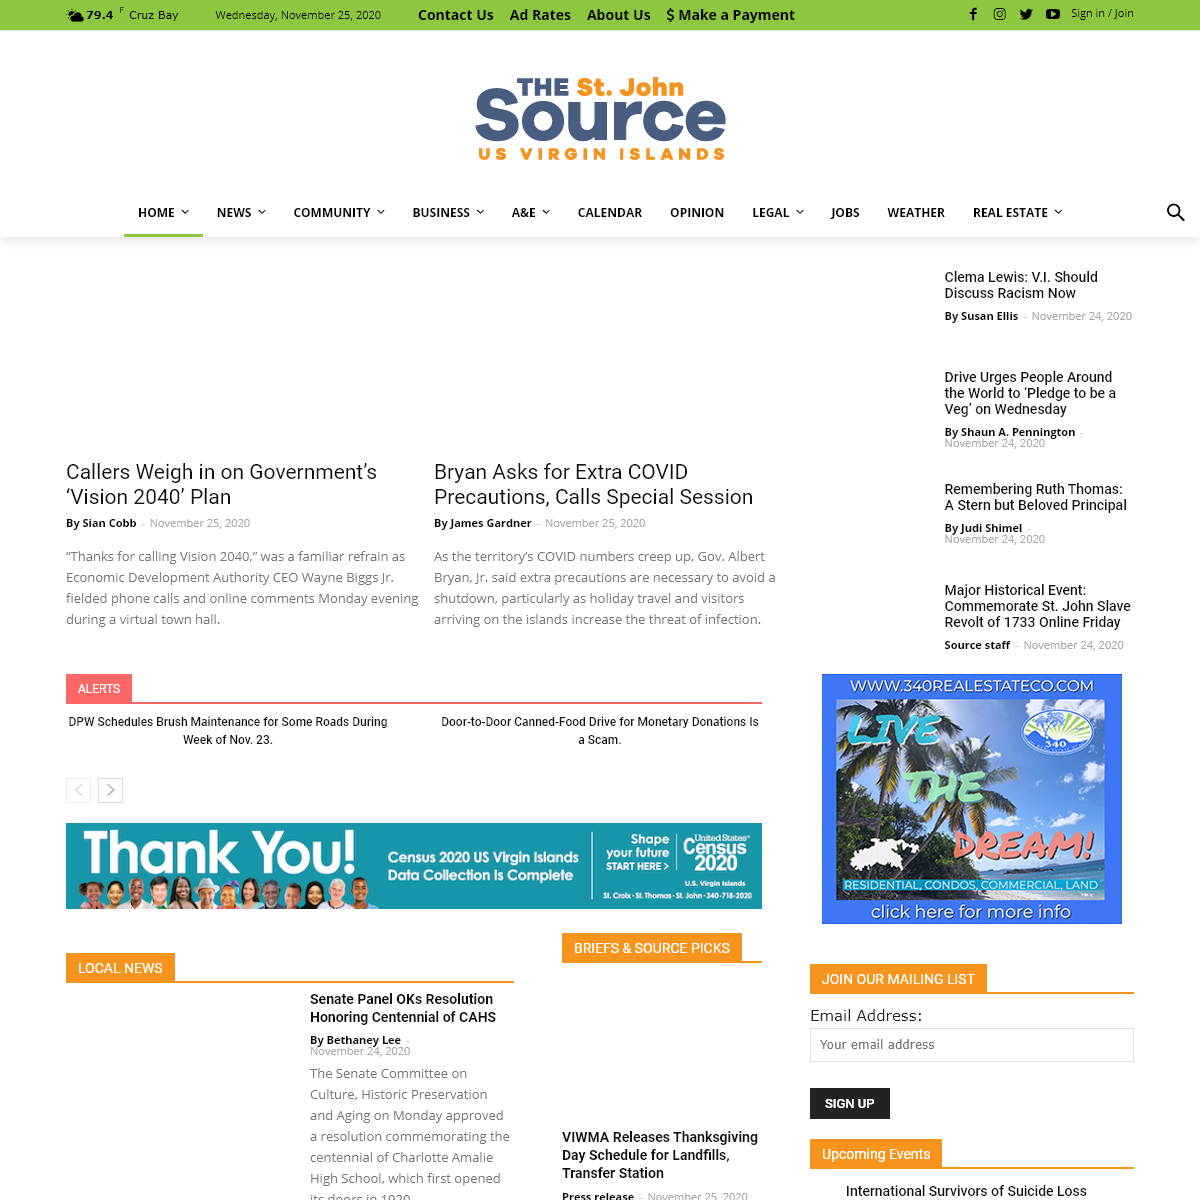 A complete backup of stjohnsource.com